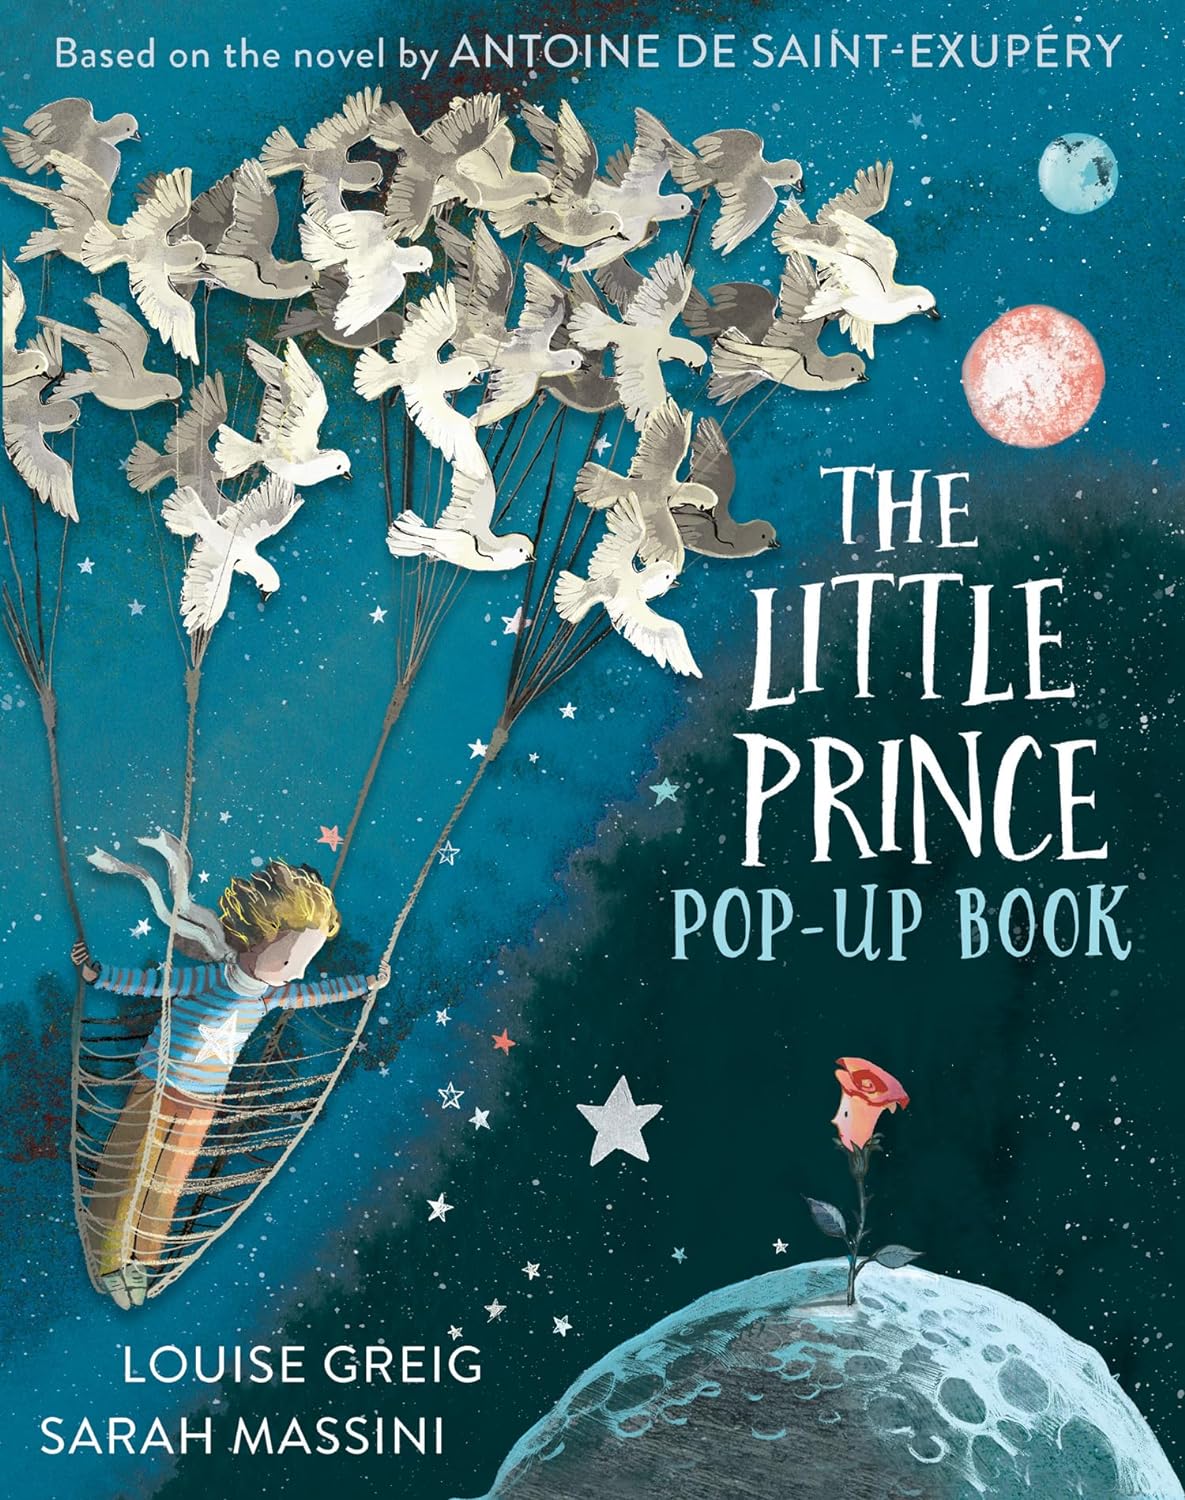 The Little Prince (Pop-up Ed.)